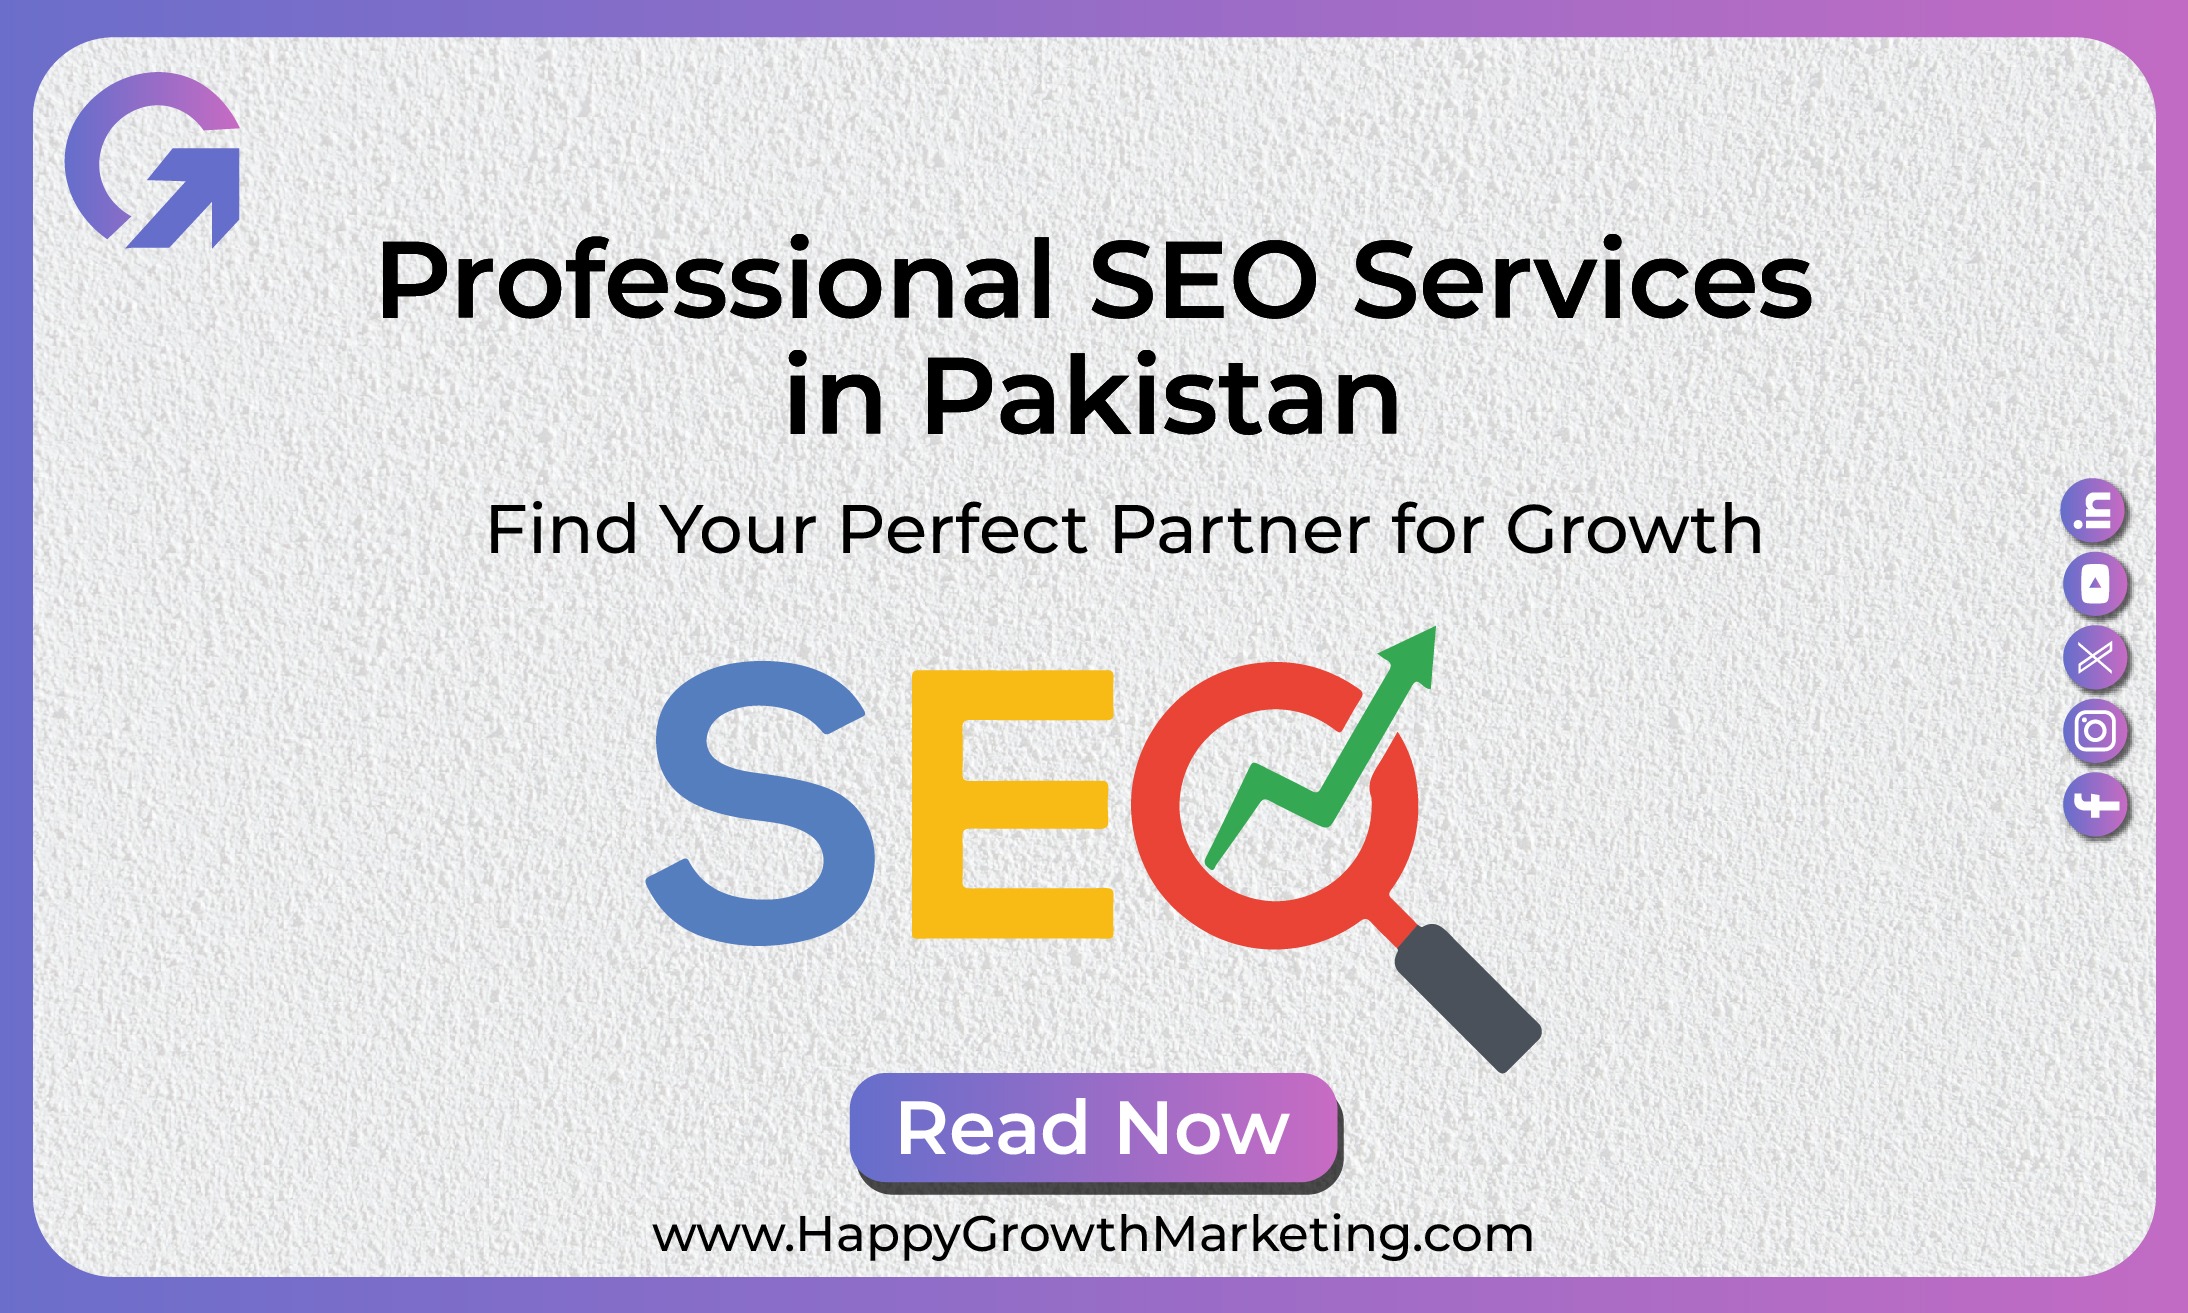 Professional SEO Services in Pakistan